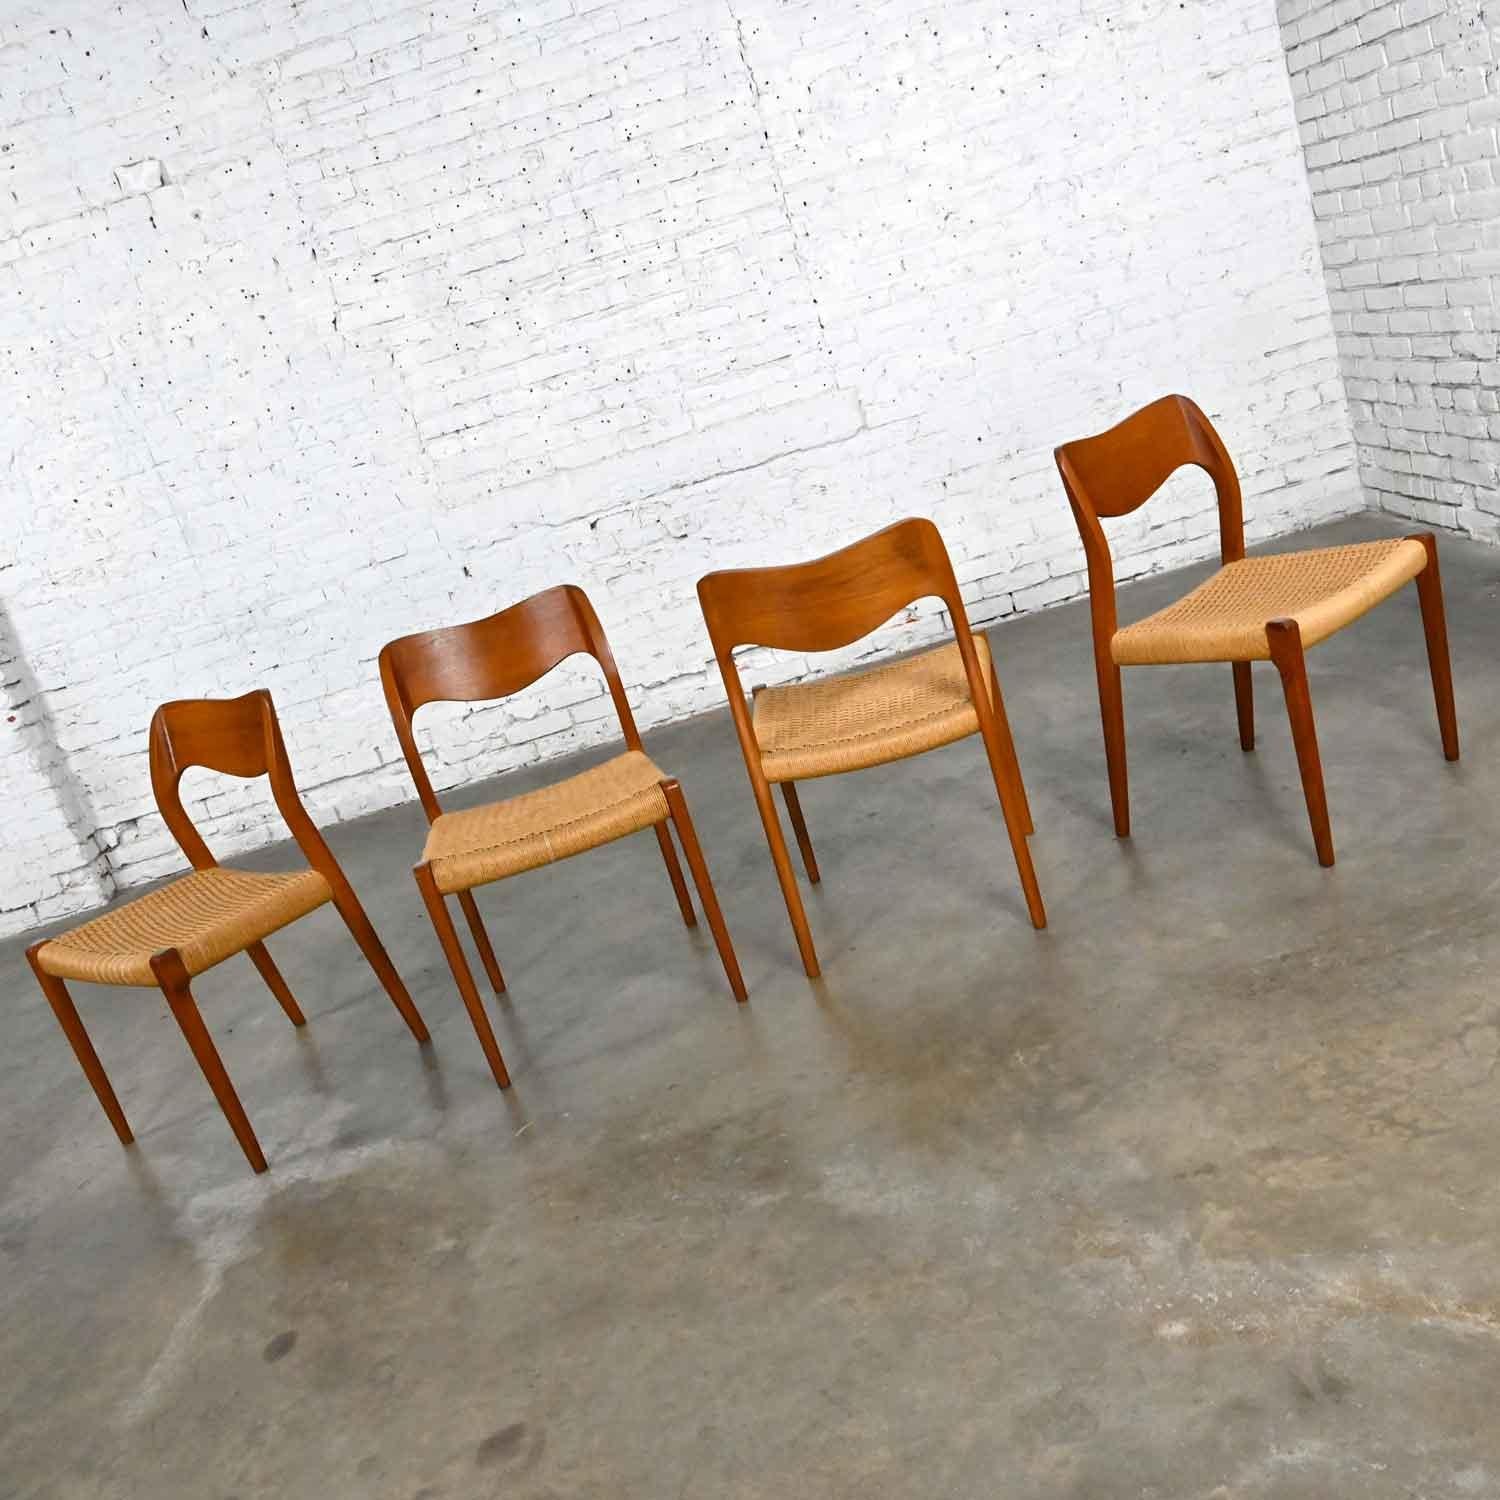 Awesome Neils O Moeller Scandinavian Modern Model 71 teak dining chairs by J.L. Mollers Mobelfabrik set of 4. Beautiful condition, keeping in mind that these are vintage and not new so will have signs of use and wear. We have repaired damaged rope